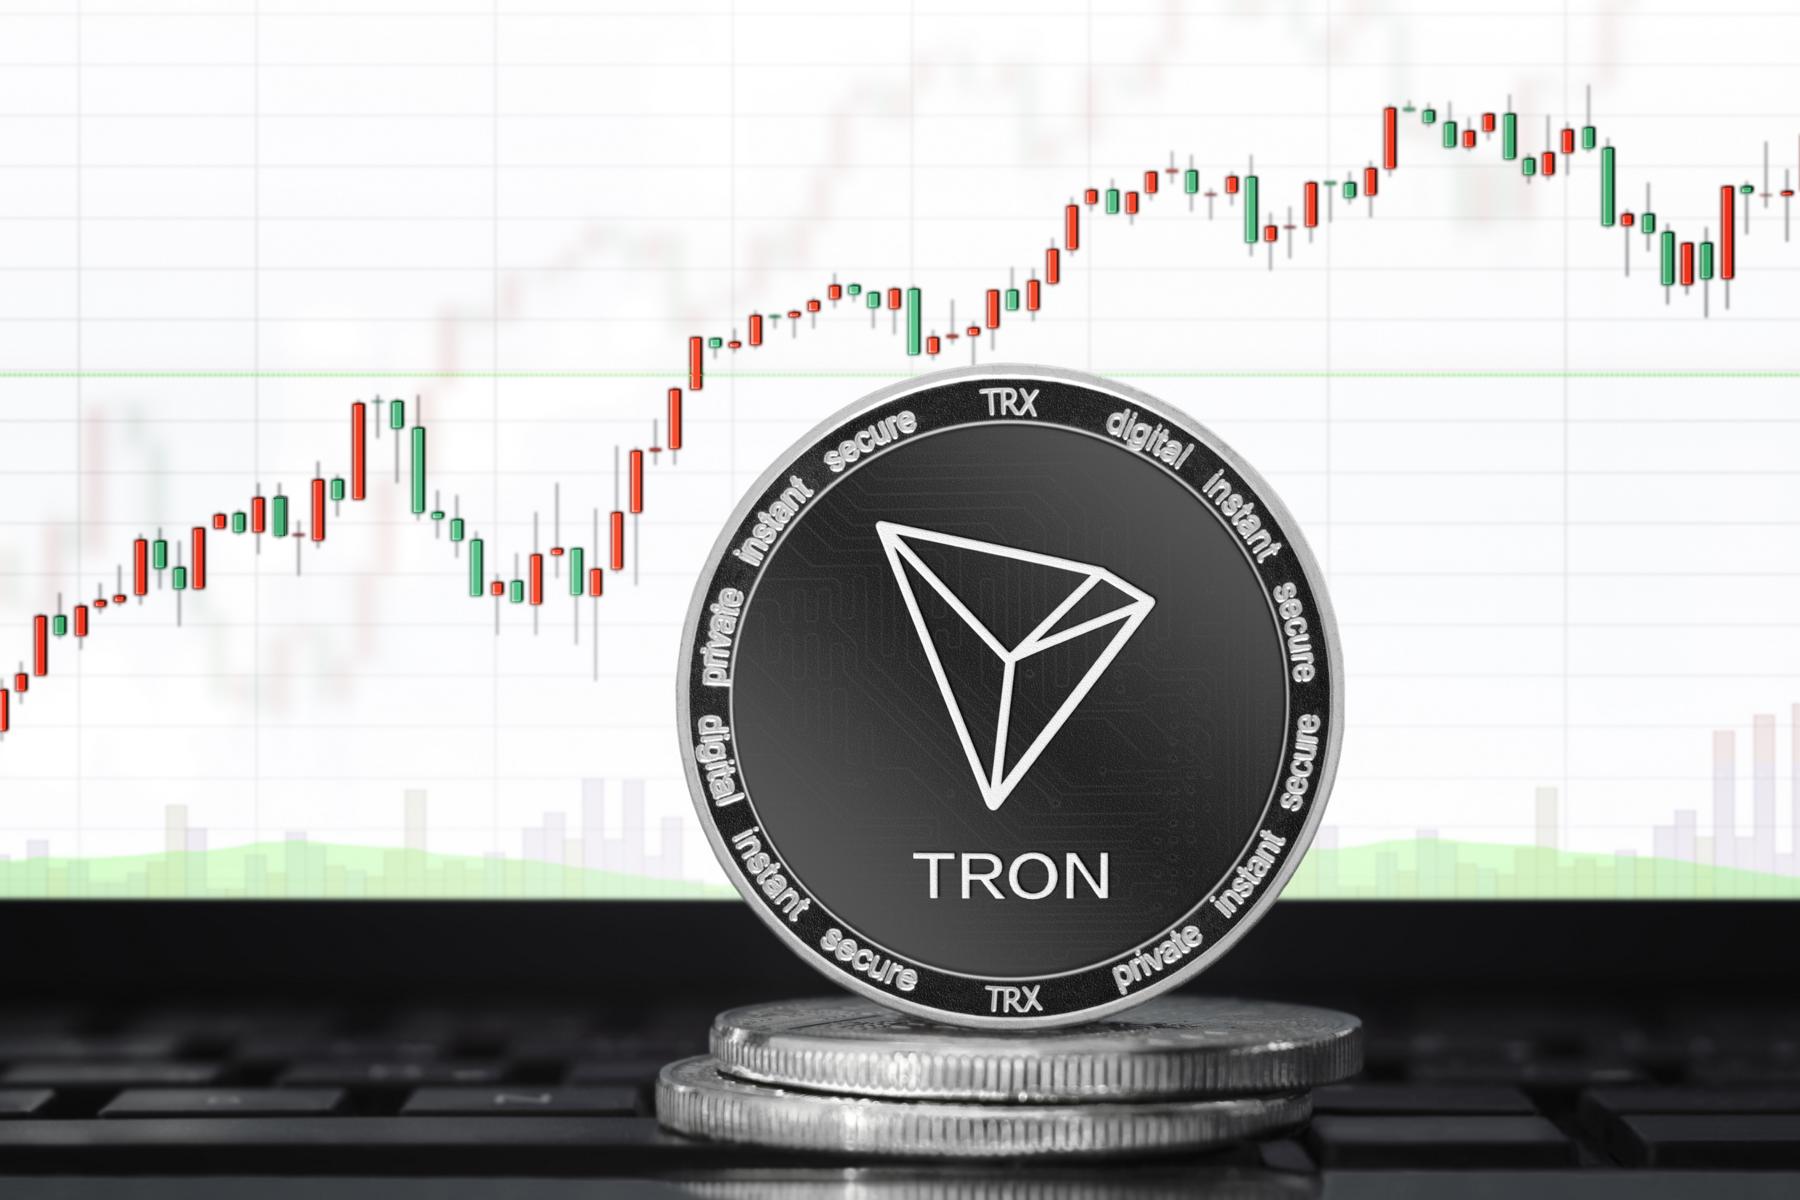 TRON (TRX) Sees Most Active Daily Users at 2M and Highest Weekly Revenue of $31M